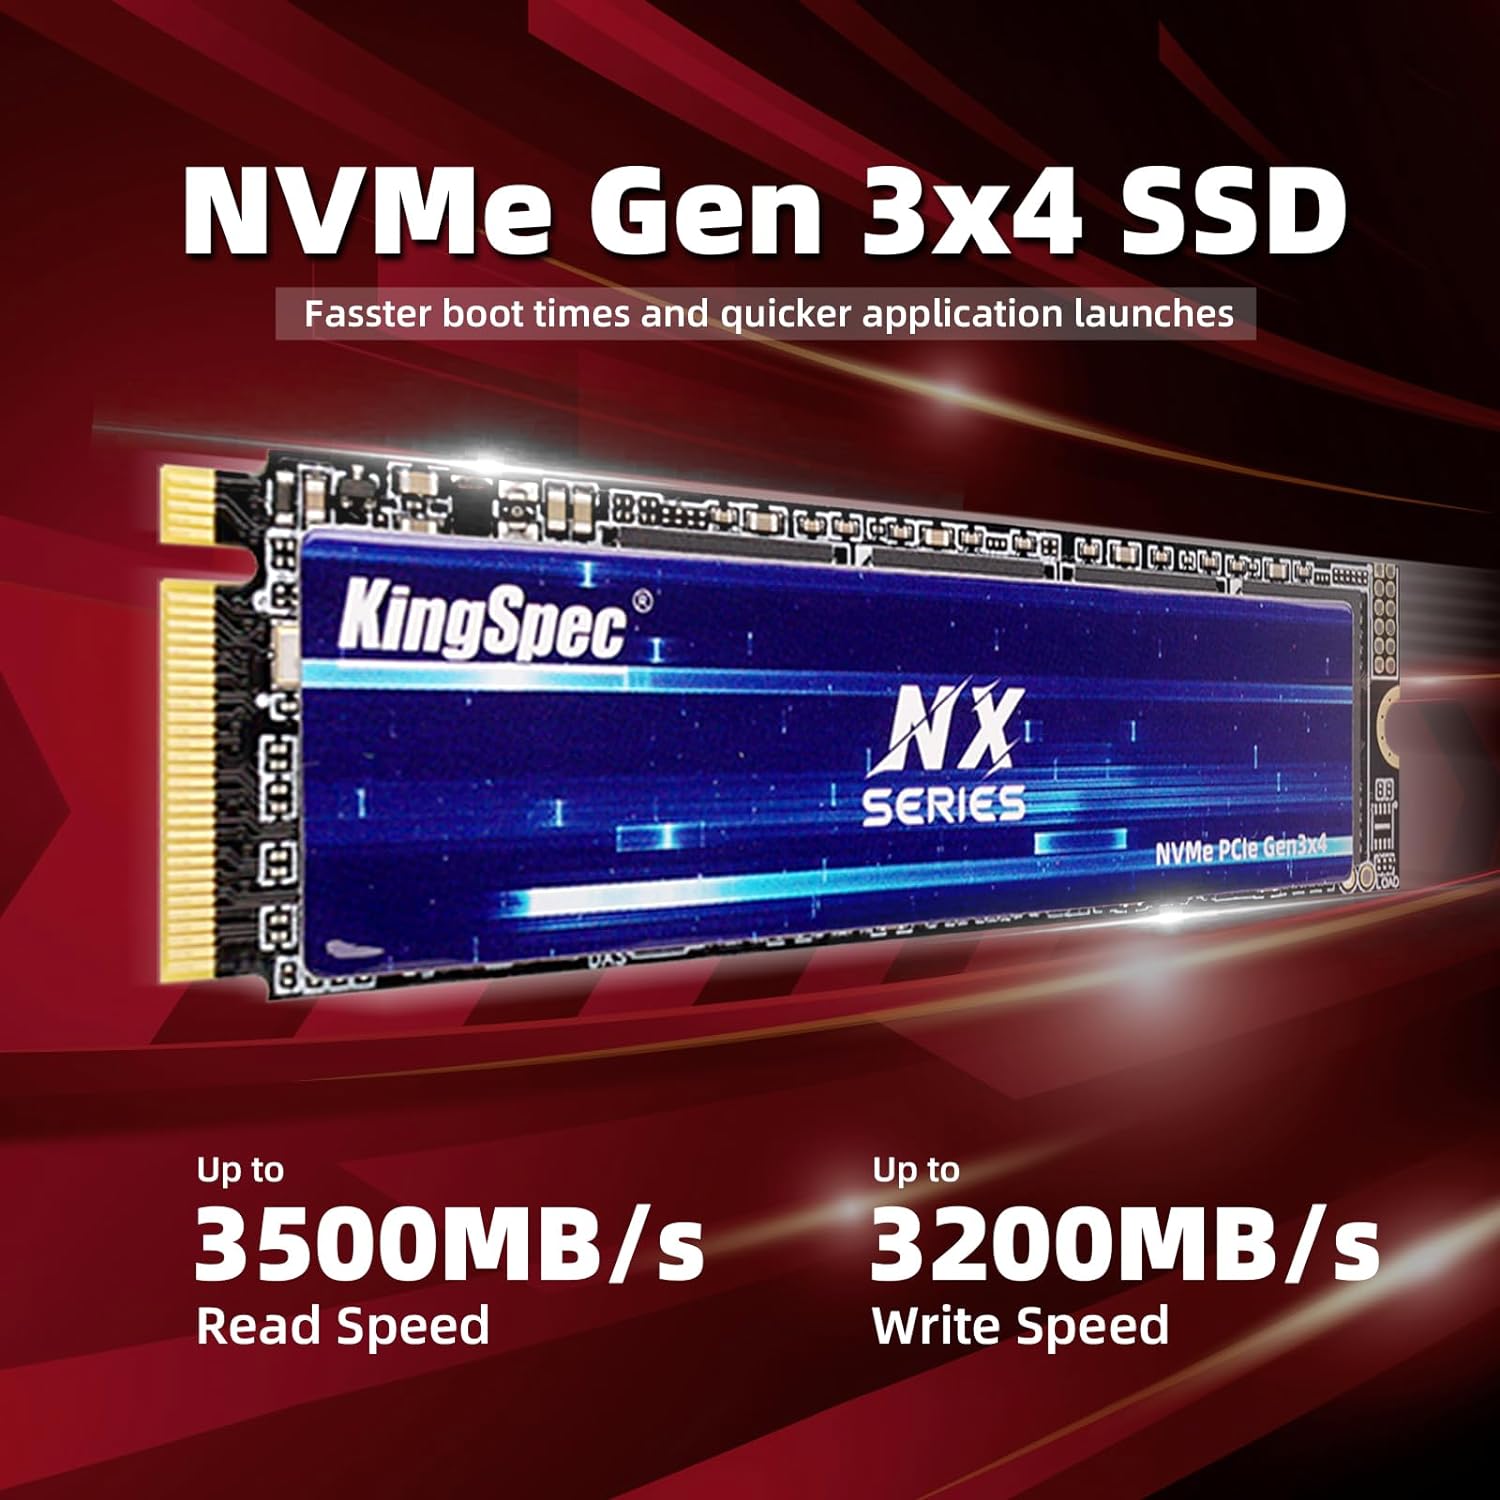 KingSpec NX Series 1TB Gen3x4 NVMe M.2 SSD, Up to 3500MB/s, 3D NAND Flash M2 2280 Internal Solid State Drive, for Desktop and Laptop